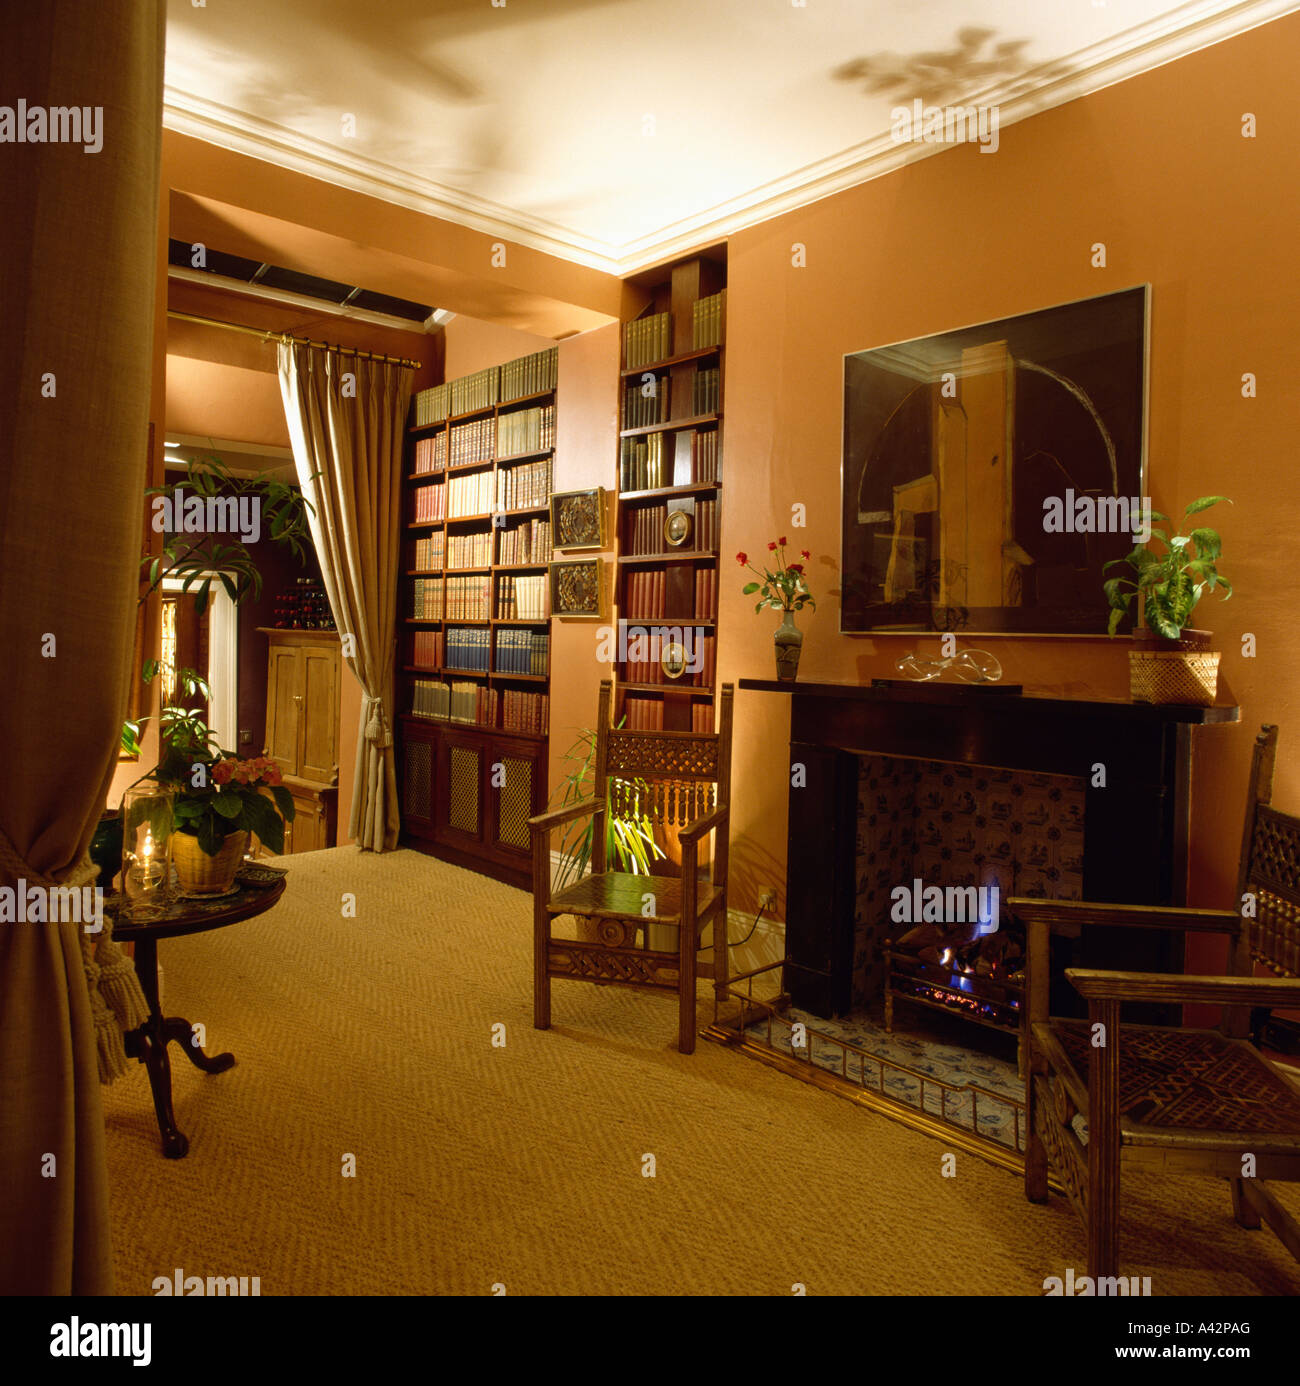 Terracotta hall with fireplace and sisal carpet Stock Photo - Alamy